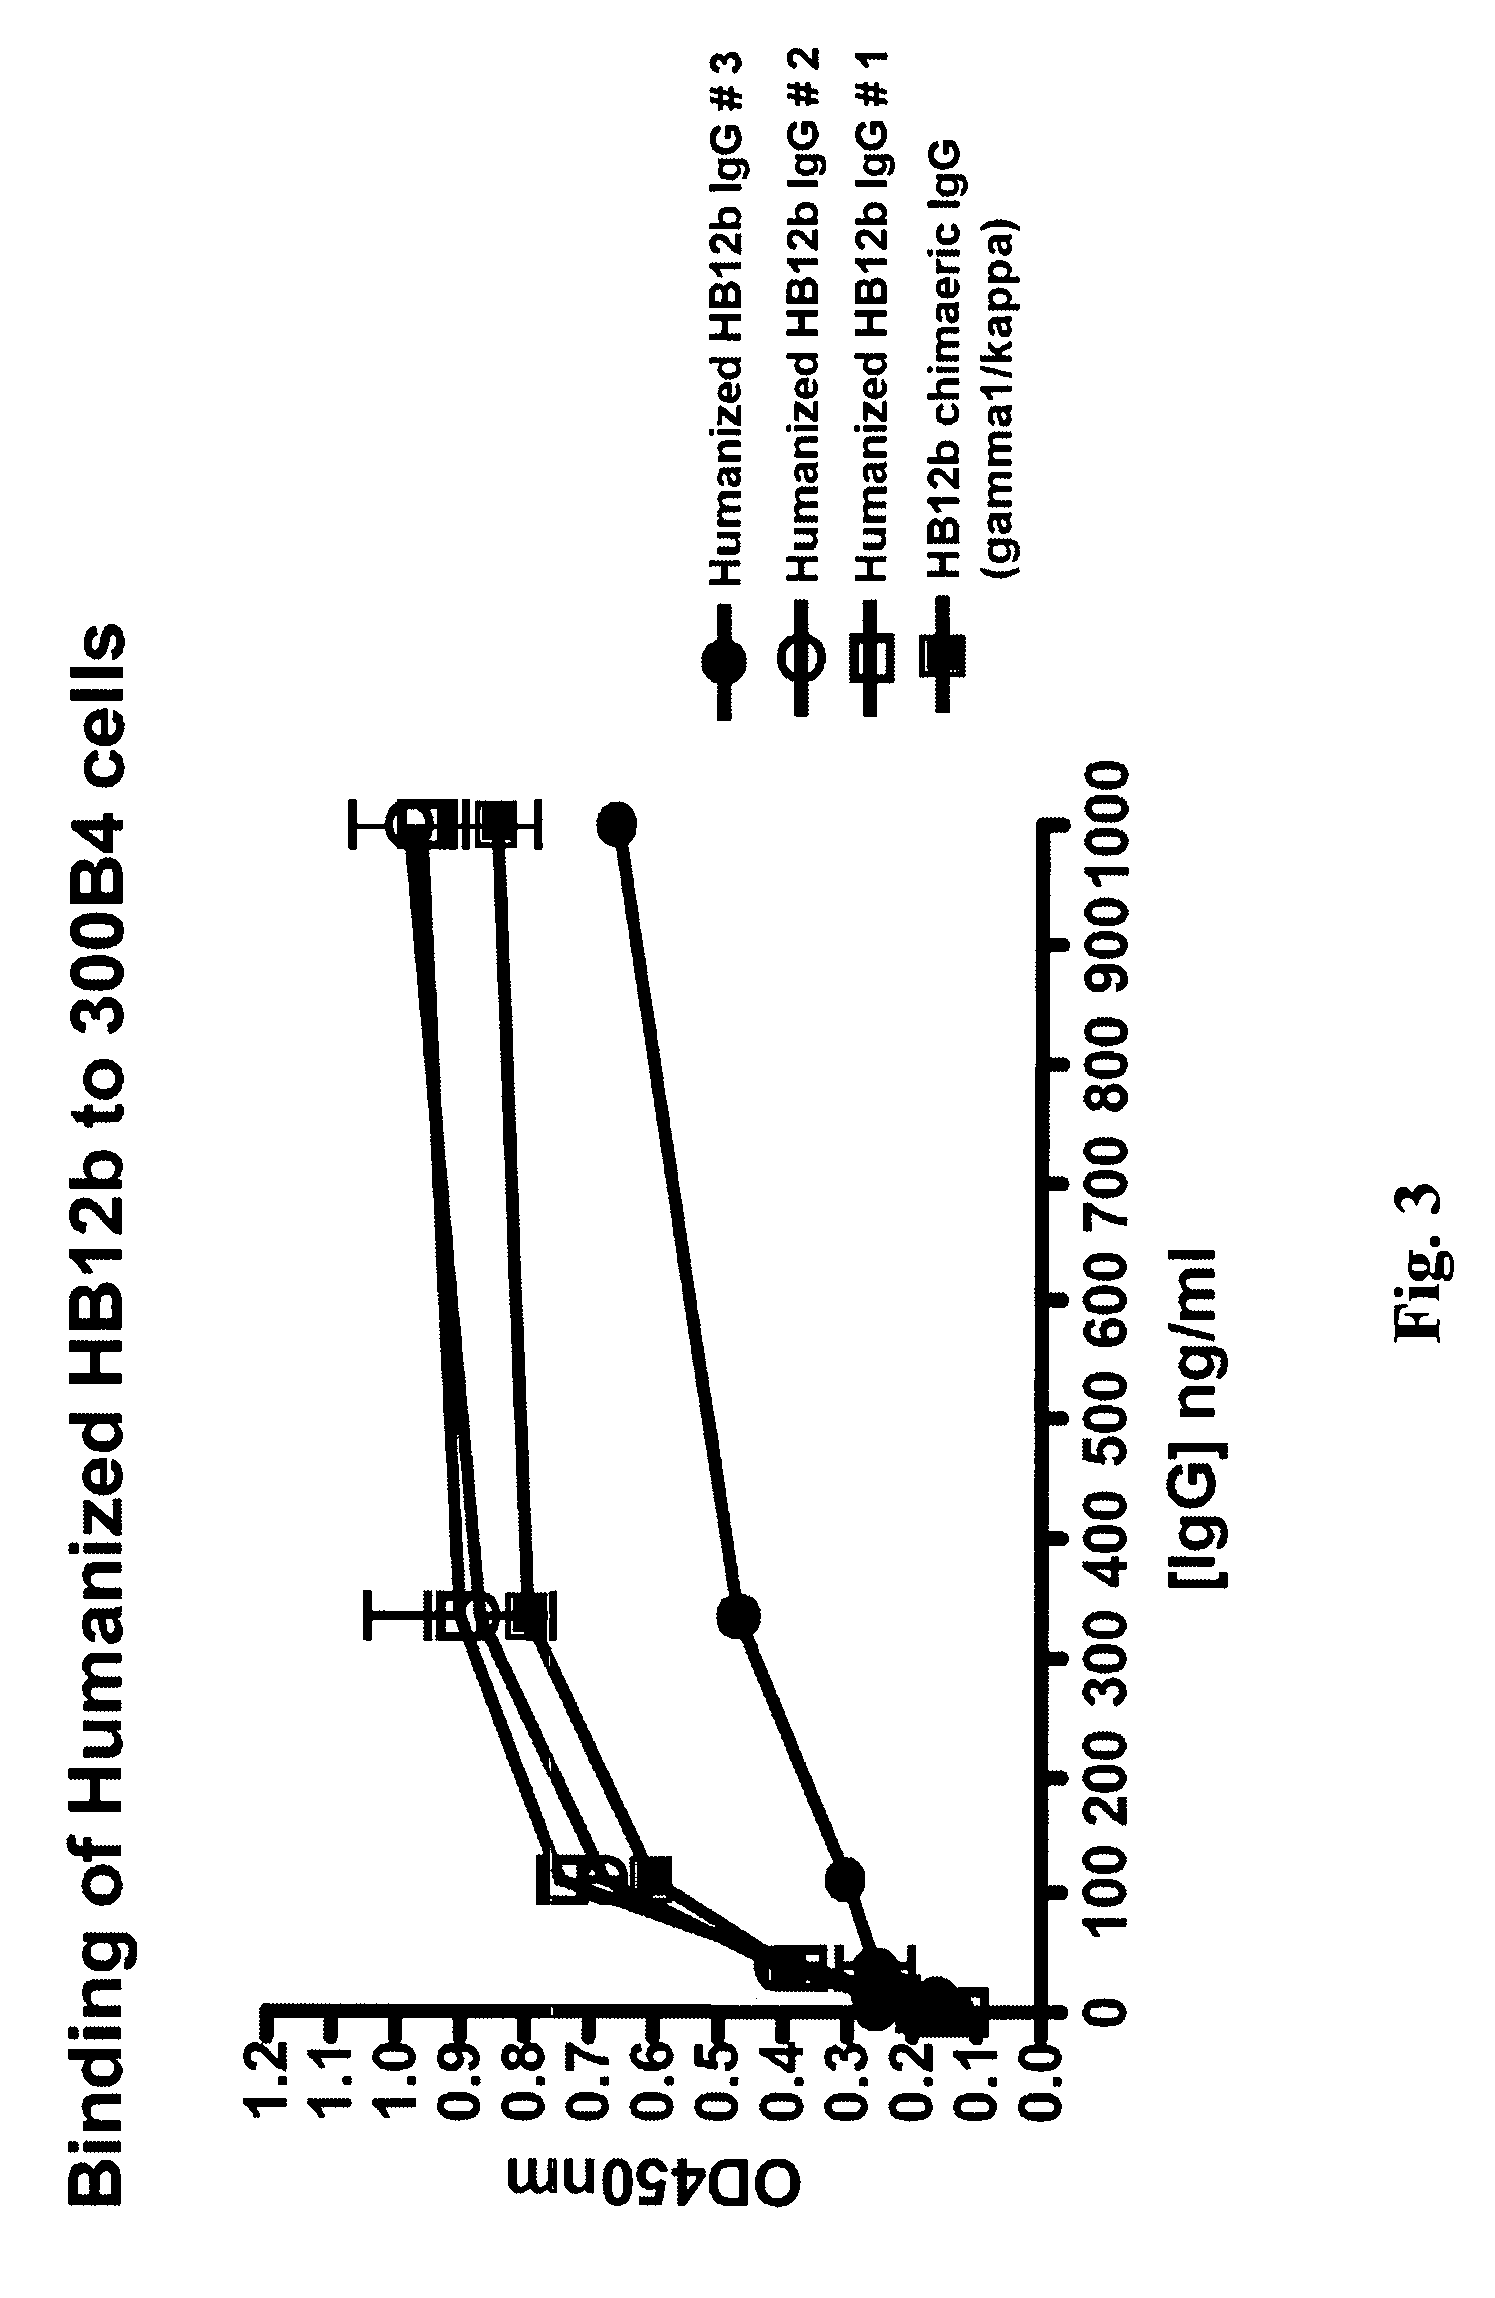 Humanized anti-CD19 antibodies and their use in treatment of oncology, transplantation and autoimmune disease